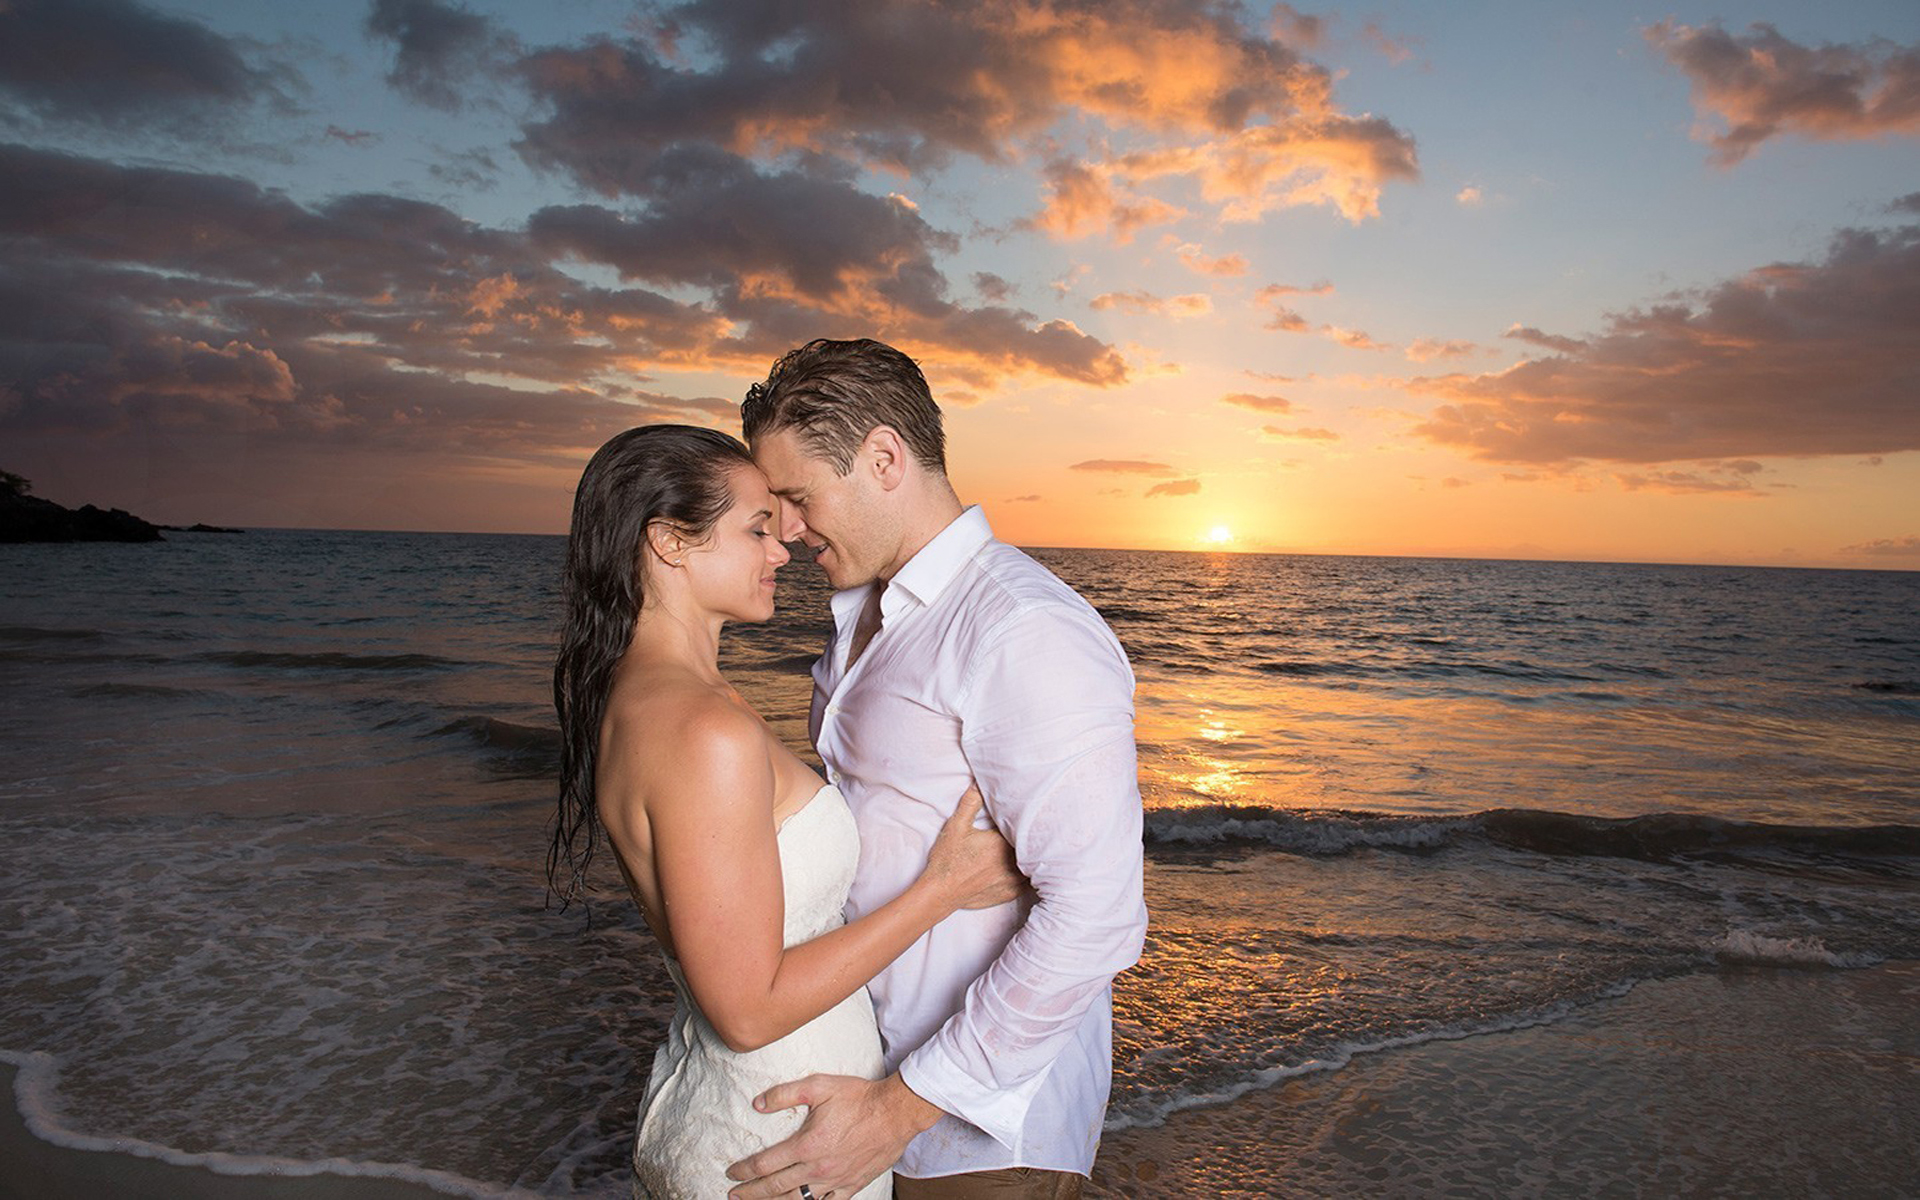 Romantic love on the beach sea baths sunset love pictures.